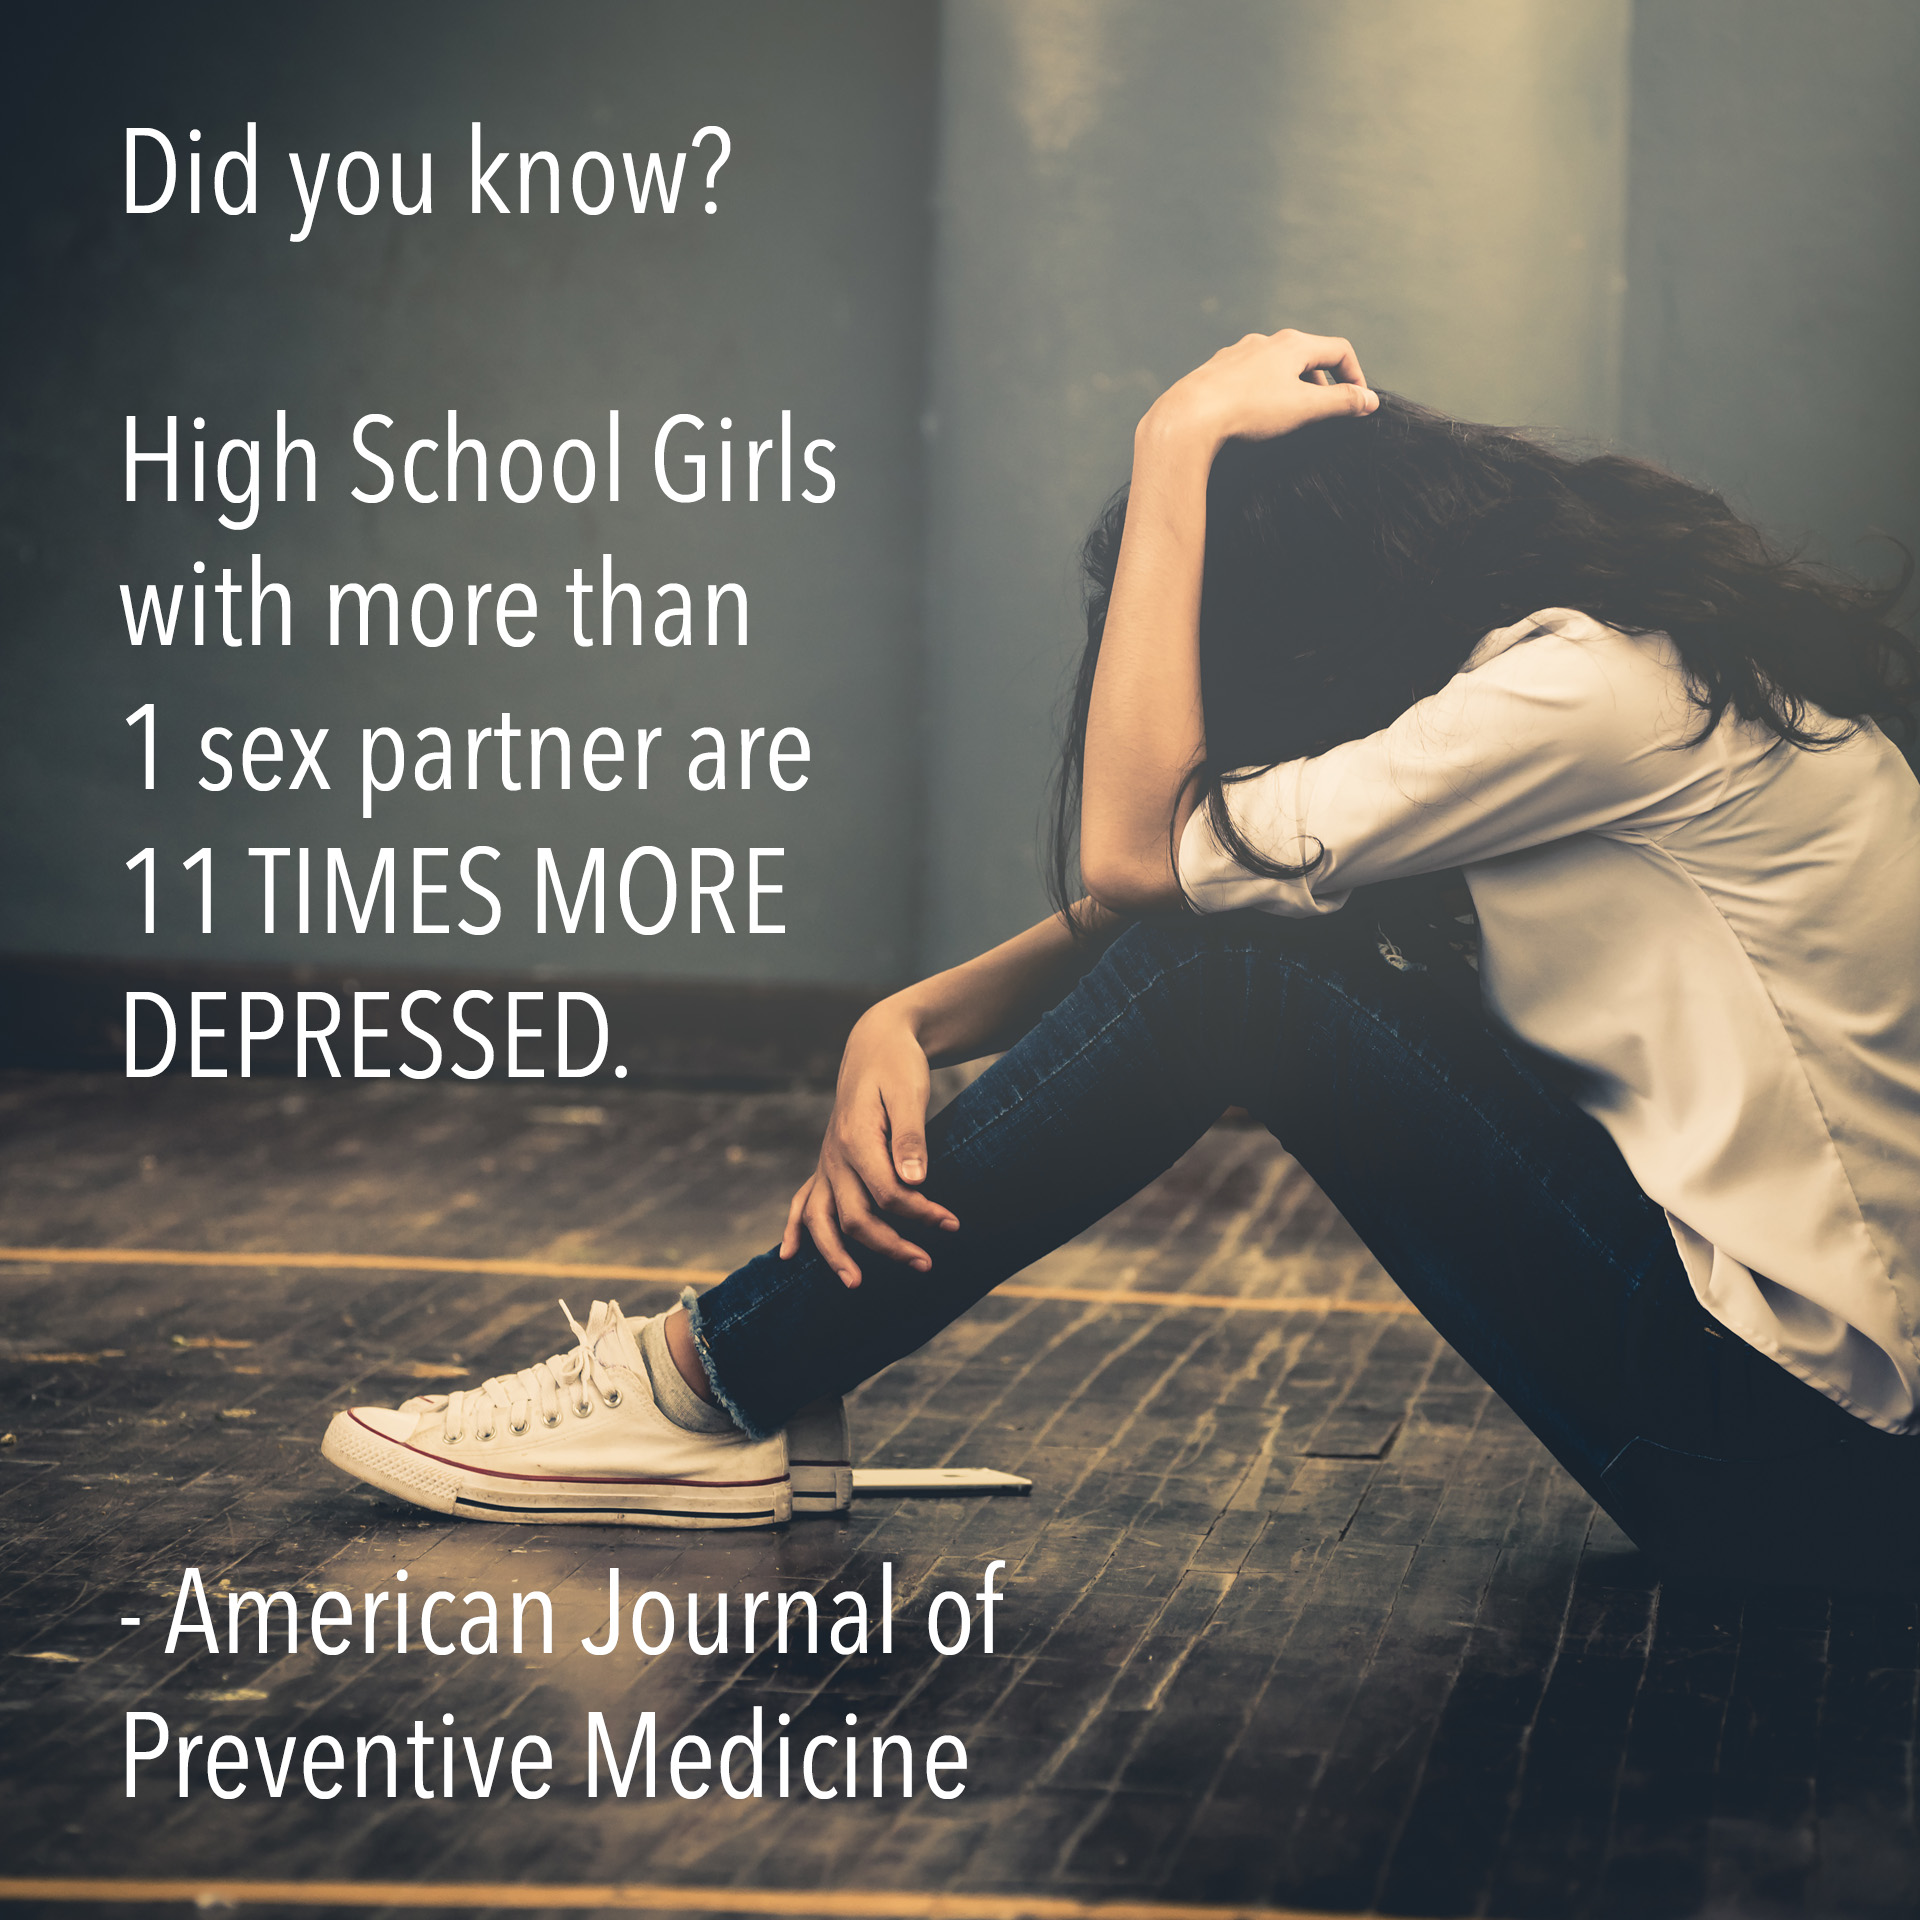 Did you know? High School Girls with more than 1 sex partner are 11 TIMES MORE DEPRESSED. - American Journal of Preventive Medicine